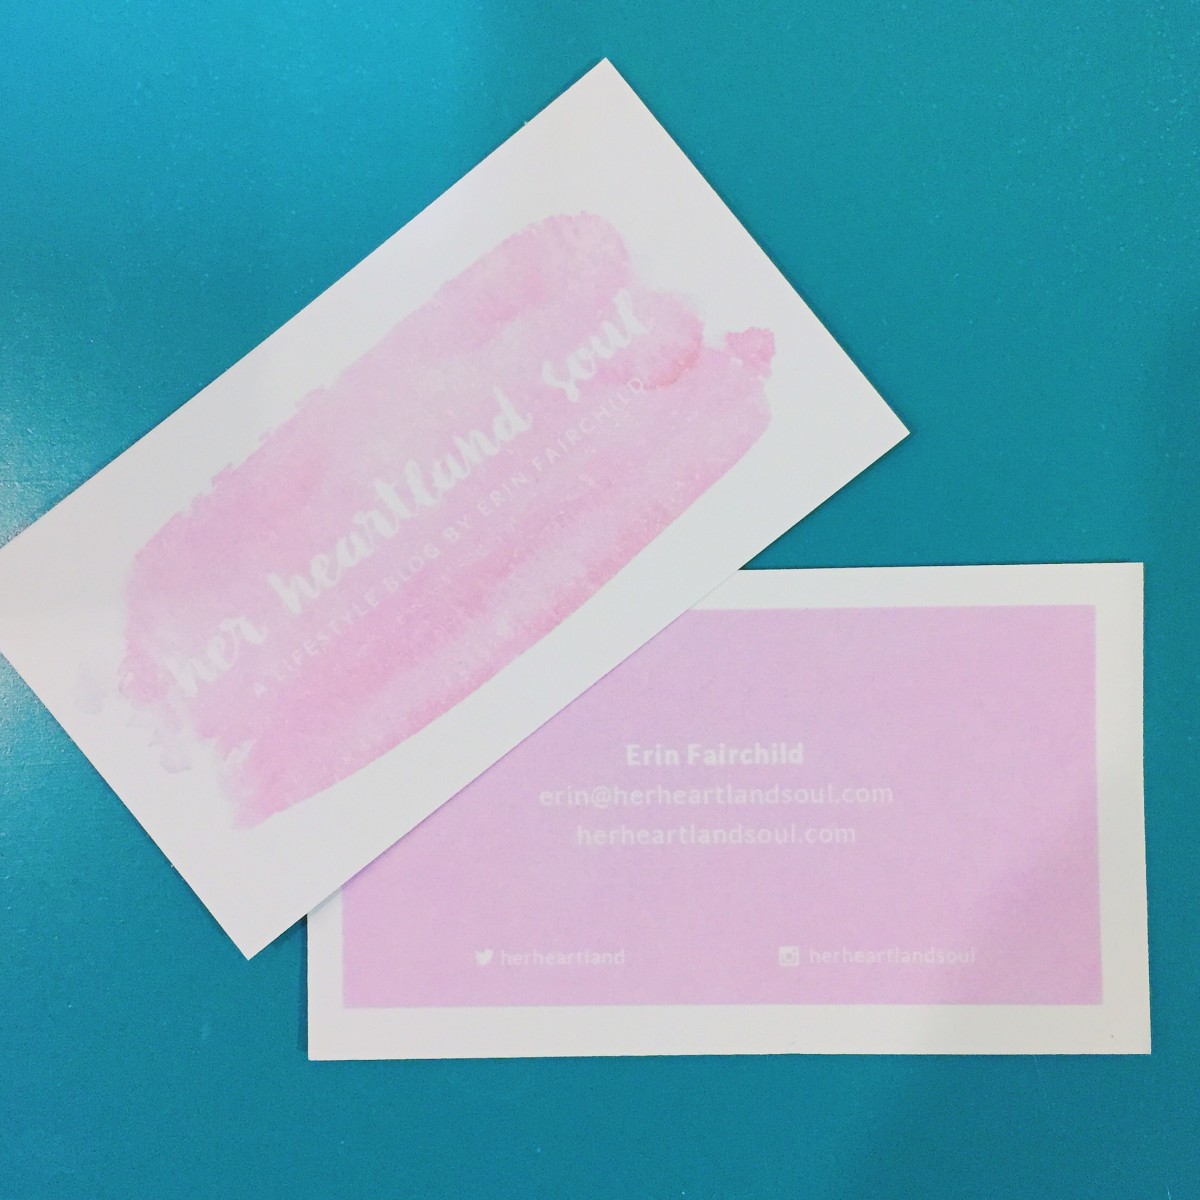 Her Heartland Soul Business Cards